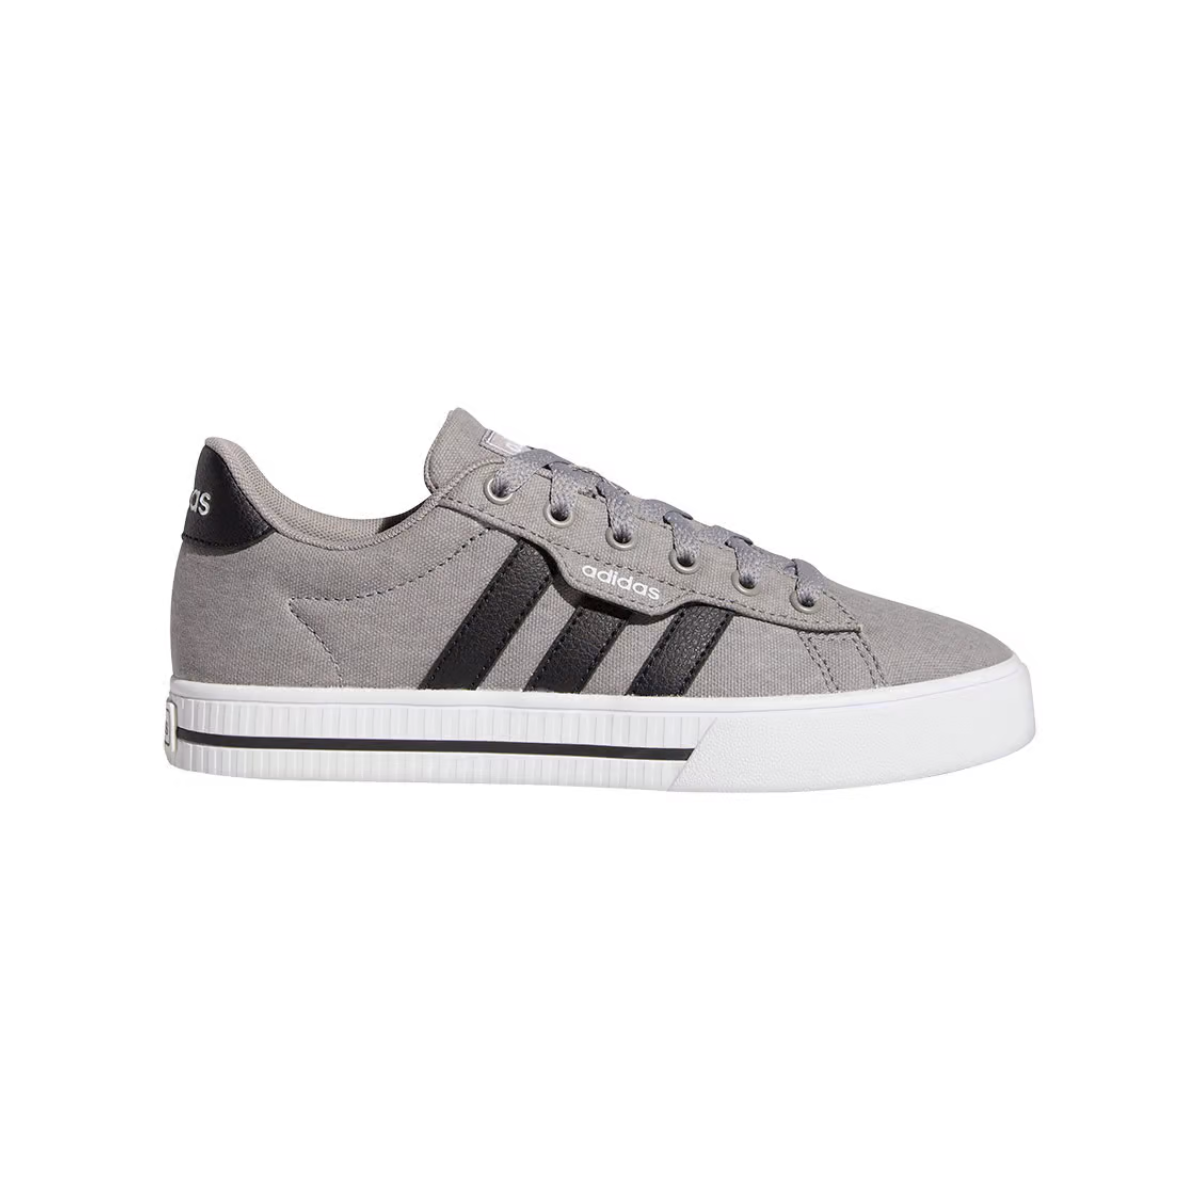 Sneakers grigie in tela con 3 strisce laterali adidas Daily 3.0 K, Brand, SKU s351500013, Immagine 0